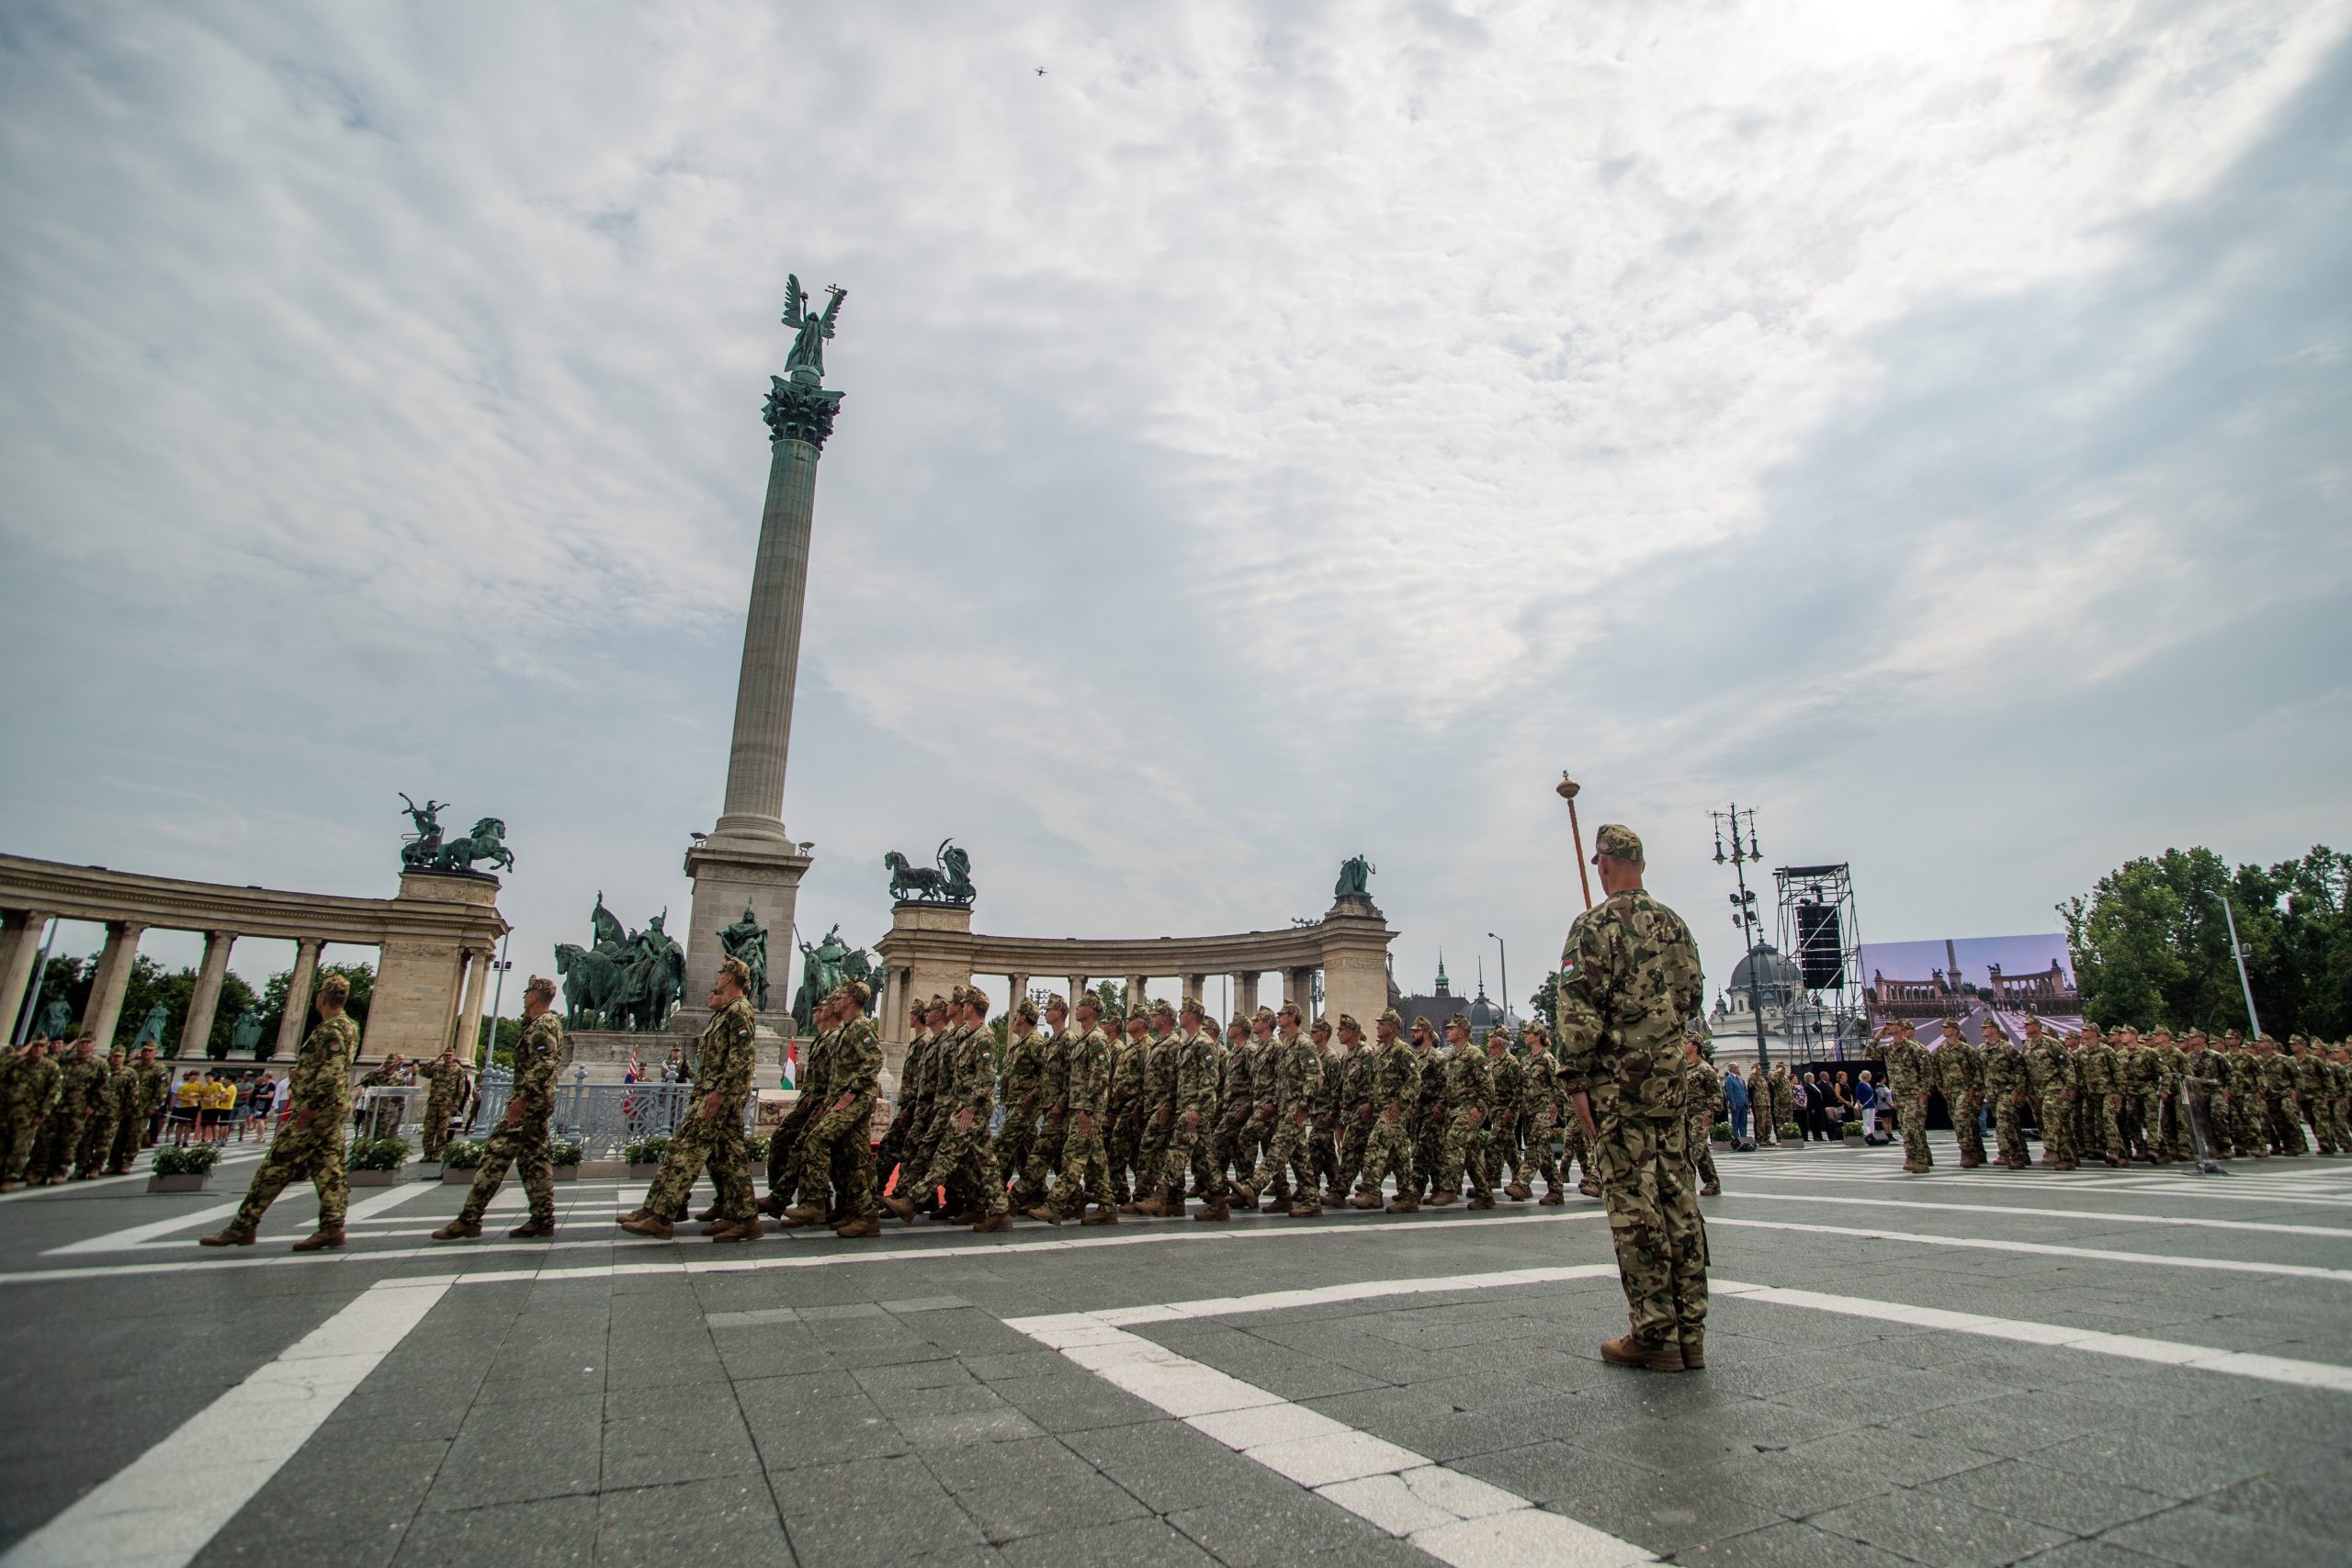 Defence Minister: Hungarian Armed Forces Can Be Counted On to Handle Any Problem